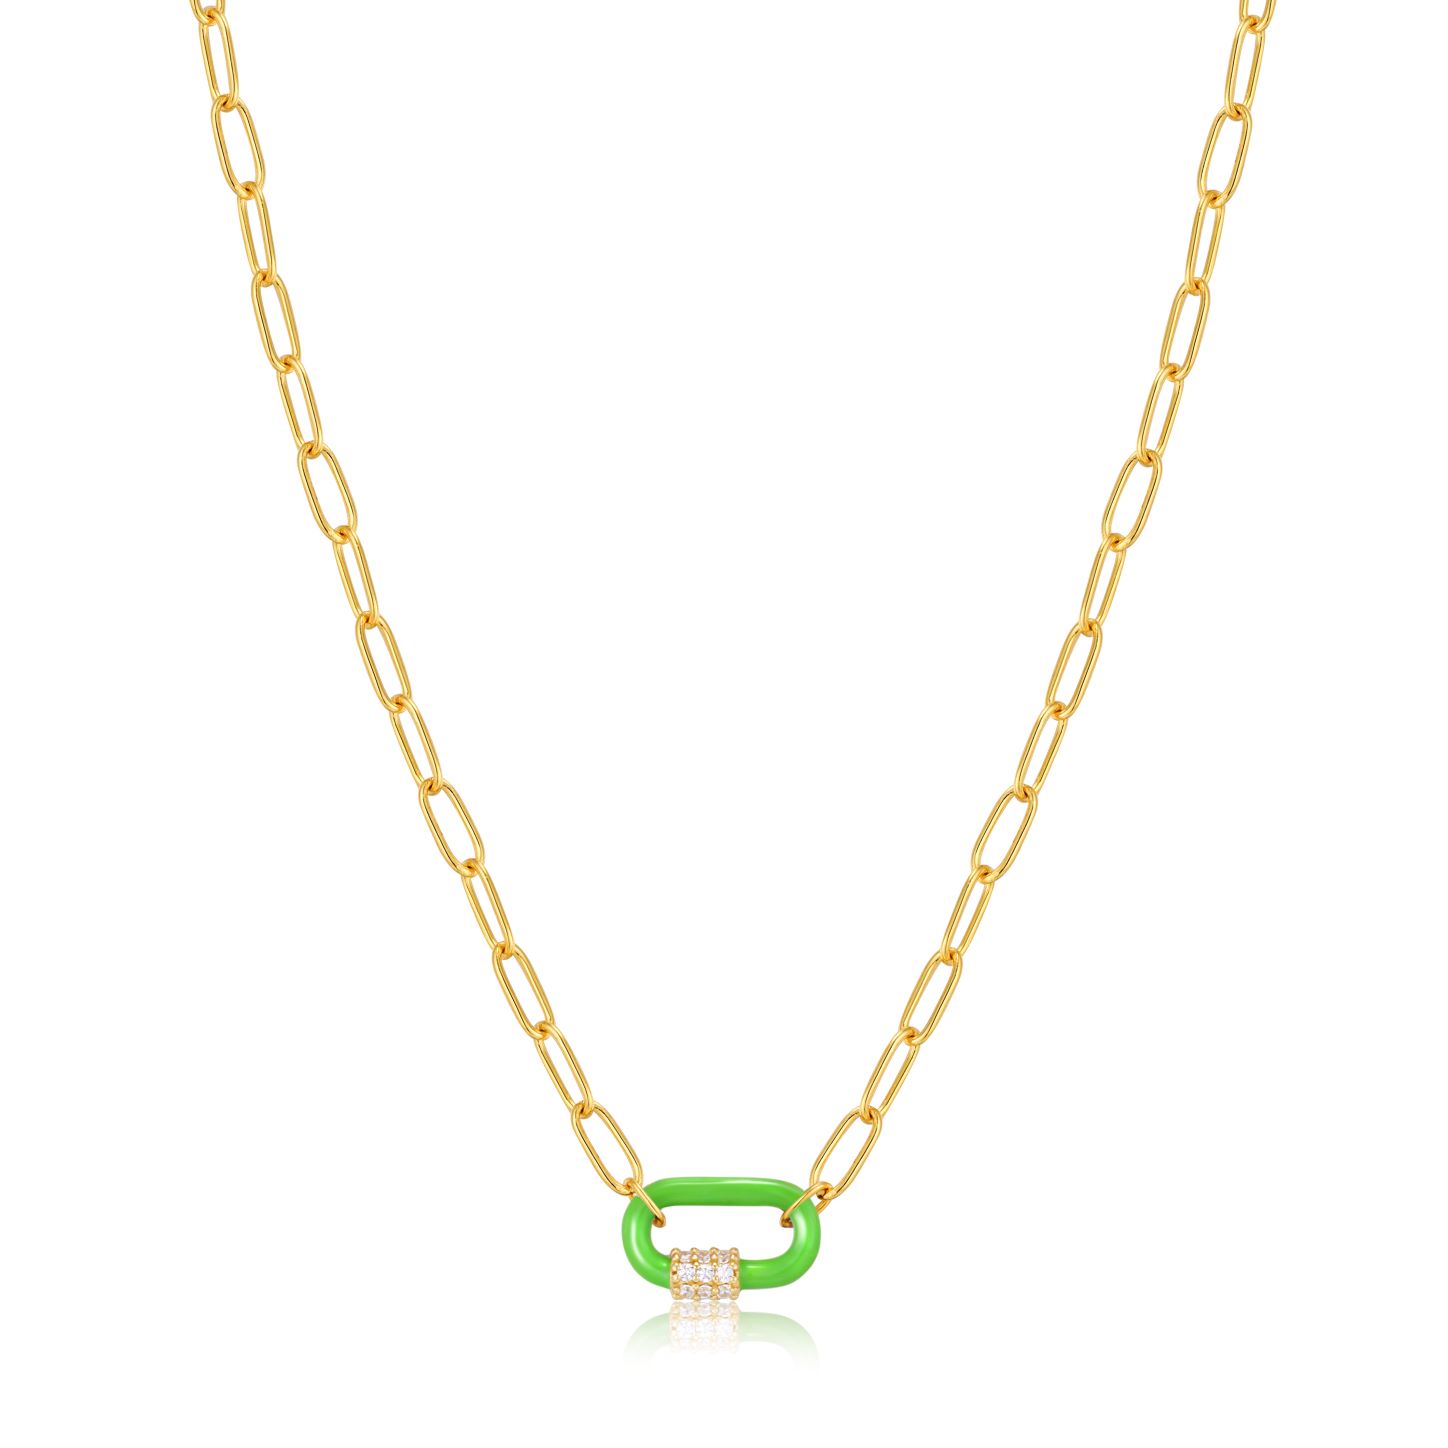 ANIA HAIE Neon Green Enamel Carabiner Gold Necklace, Gold-plated